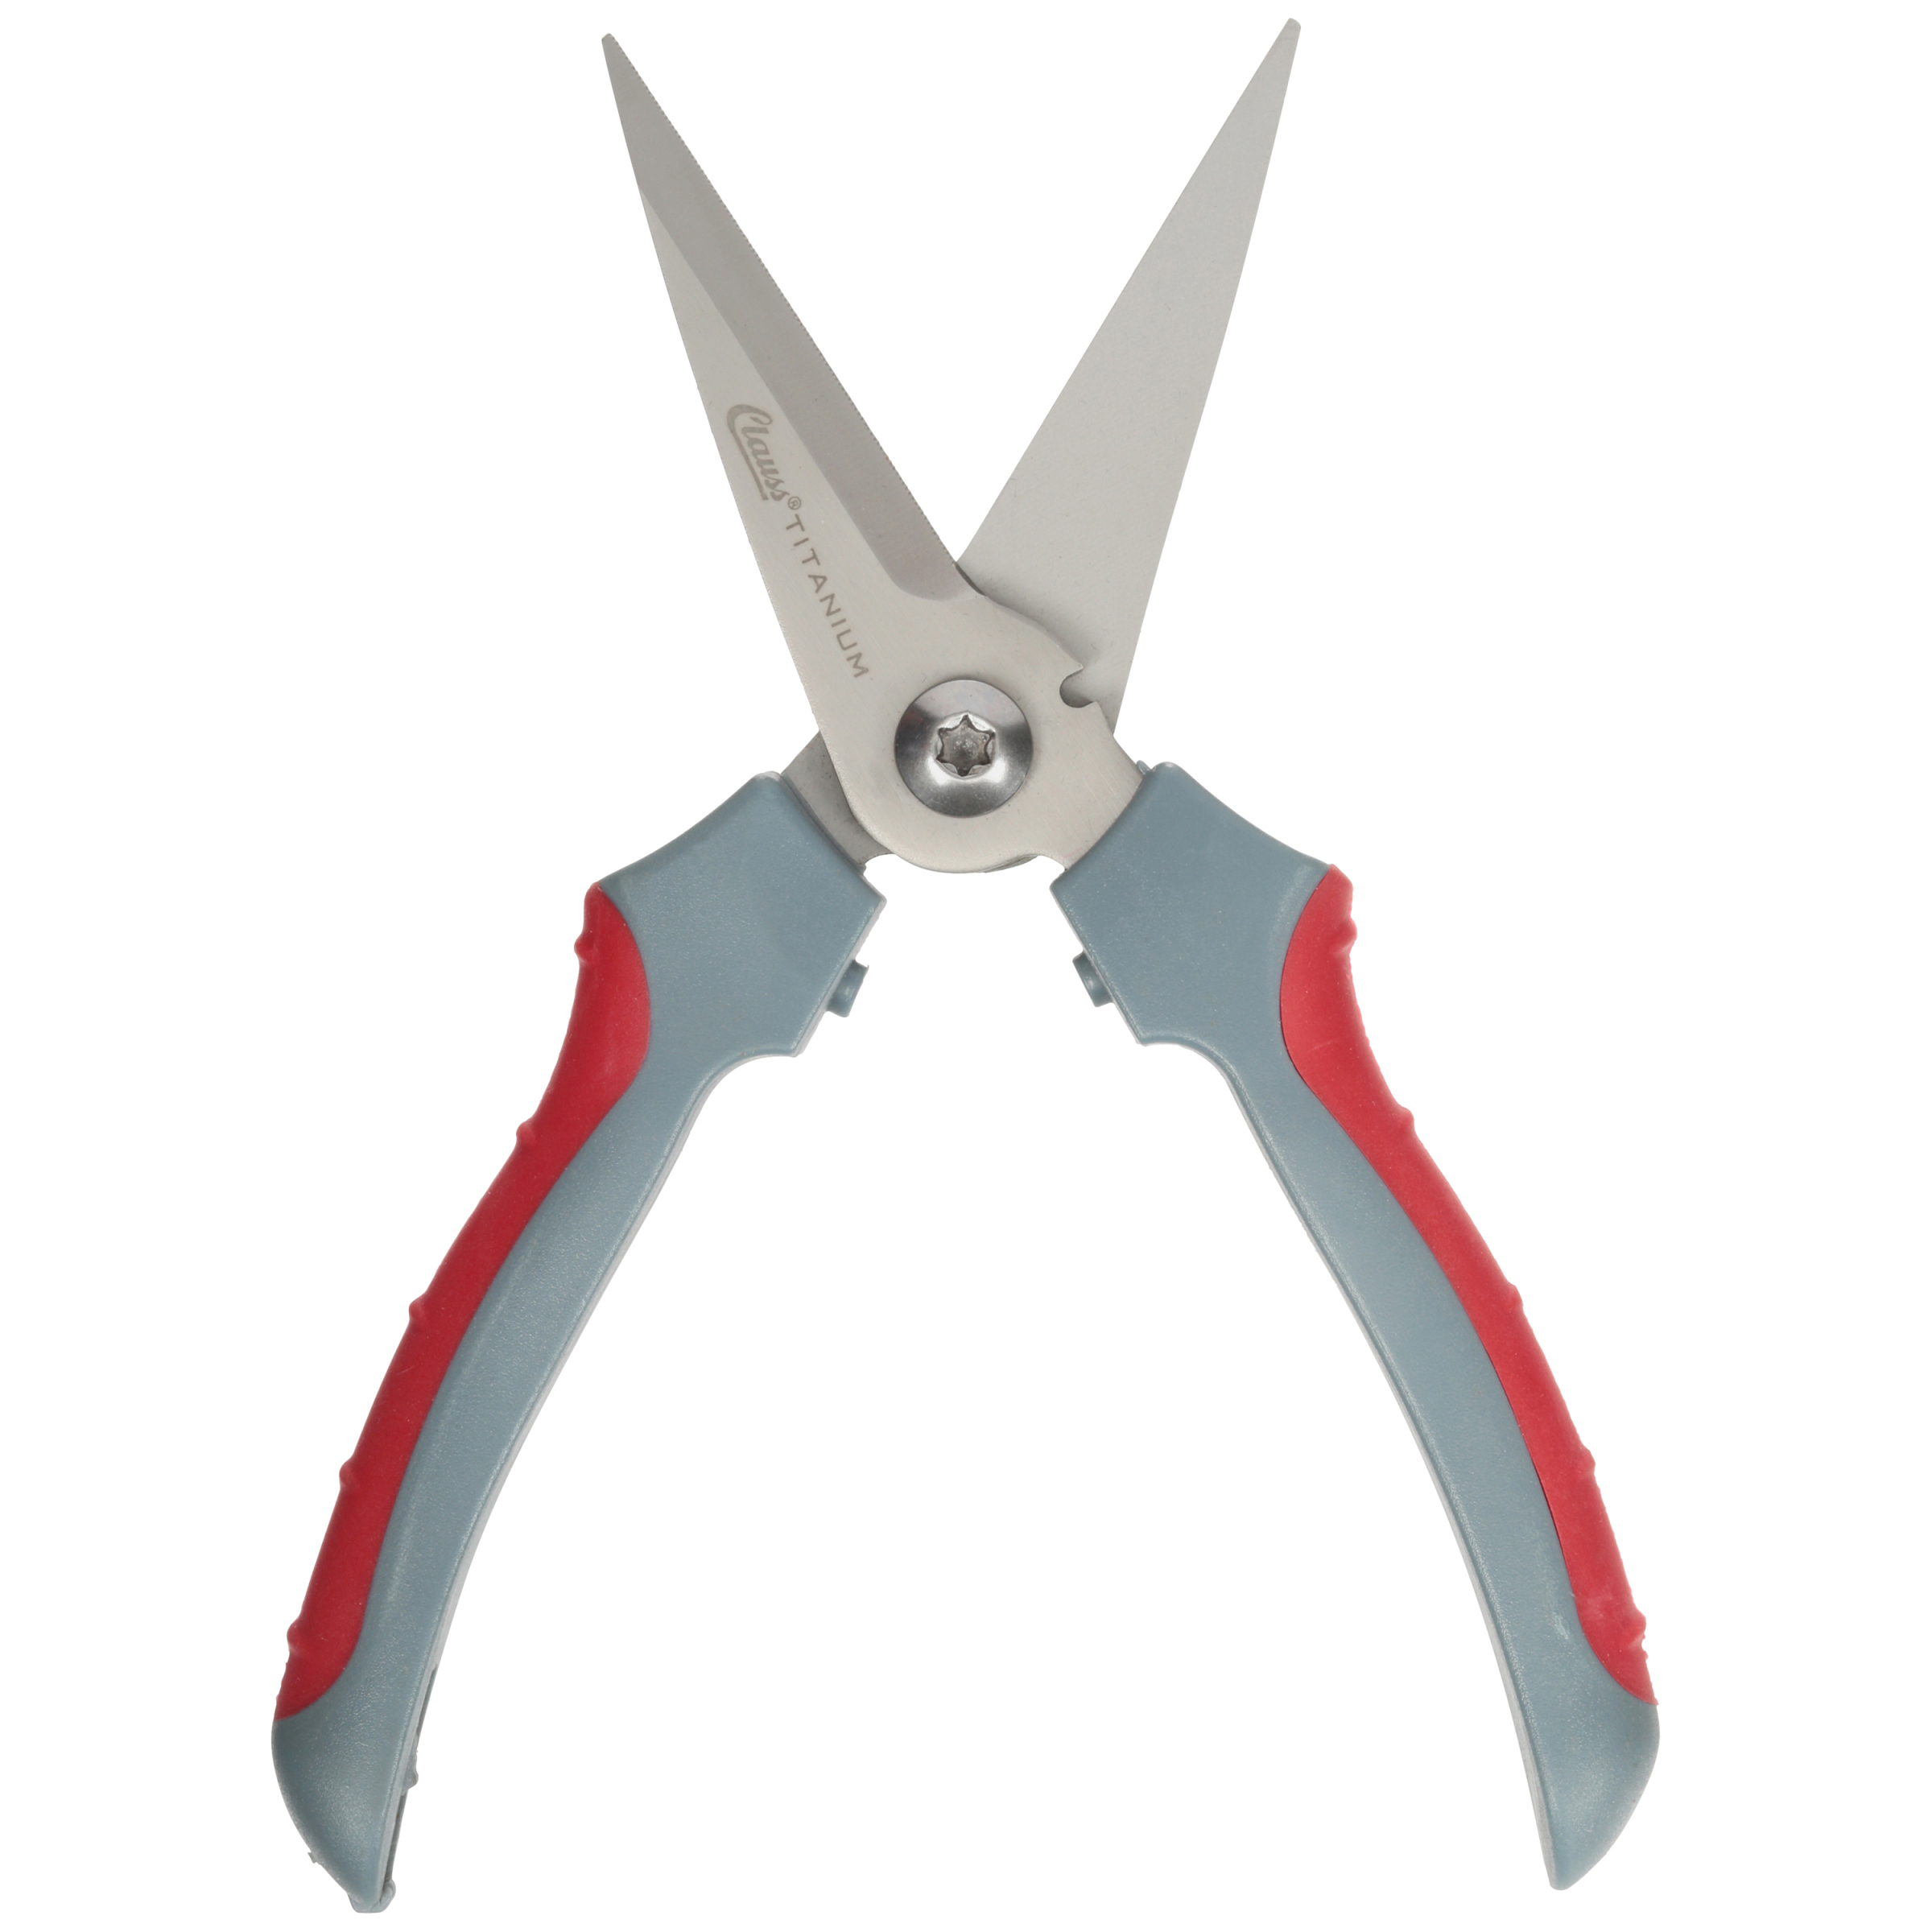 Clauss 8" Titanium Bonded Straight Micro-Serrated Snip, Hand Tool Pliers, Red and Gray - image 2 of 8